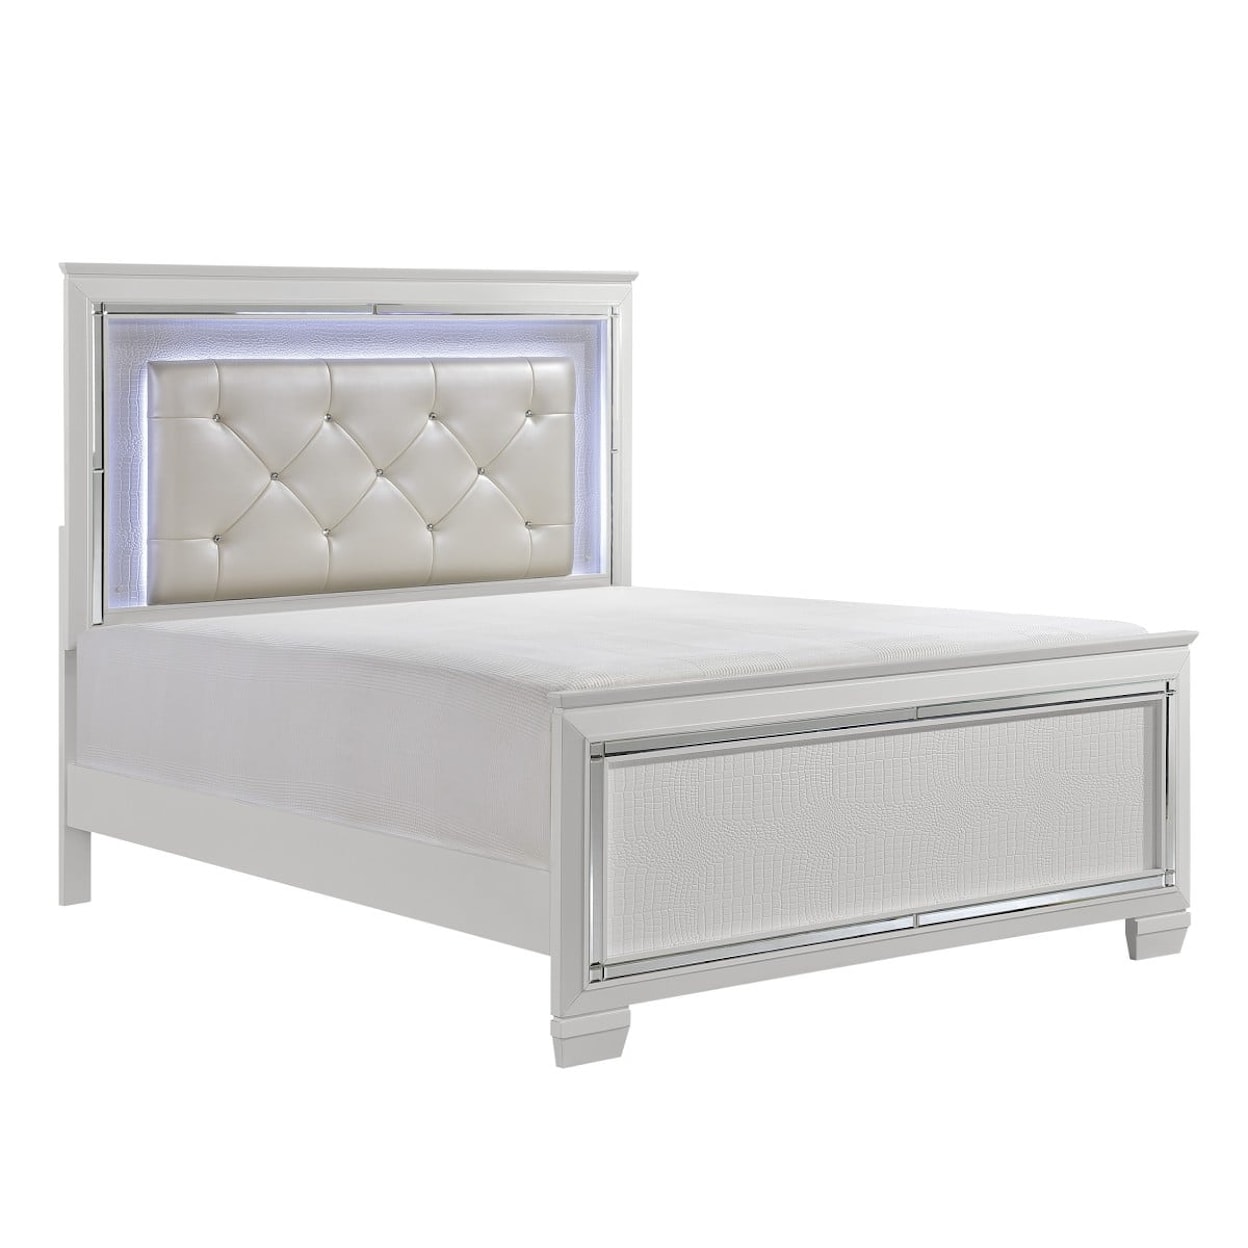 Homelegance Furniture Allura California King Panel Bed with LED Lights